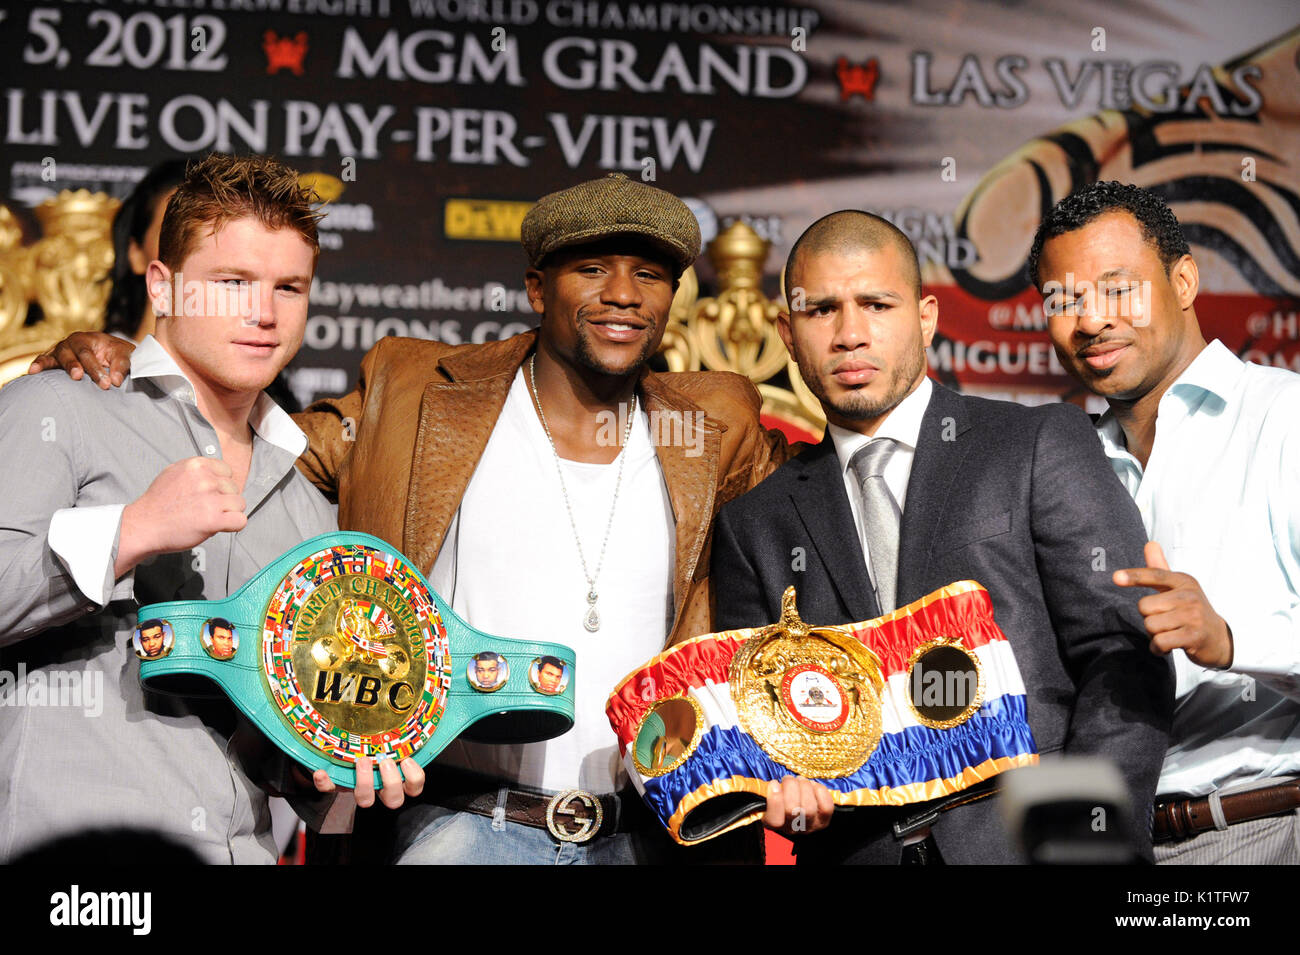 Canelo Alvarez,US boxer Floyd Mayweather,WBA Super Welterweight World Champion Miguel Cotto Puerto Rico Sugar Shane Mosley during press conference Grauman's Chinese Theatre Hollywood March 1,2012. Mayweather Cotto will meet WBA Super Welterweight World Championship fight May 5 MGM Grand Las Vegas. Stock Photo